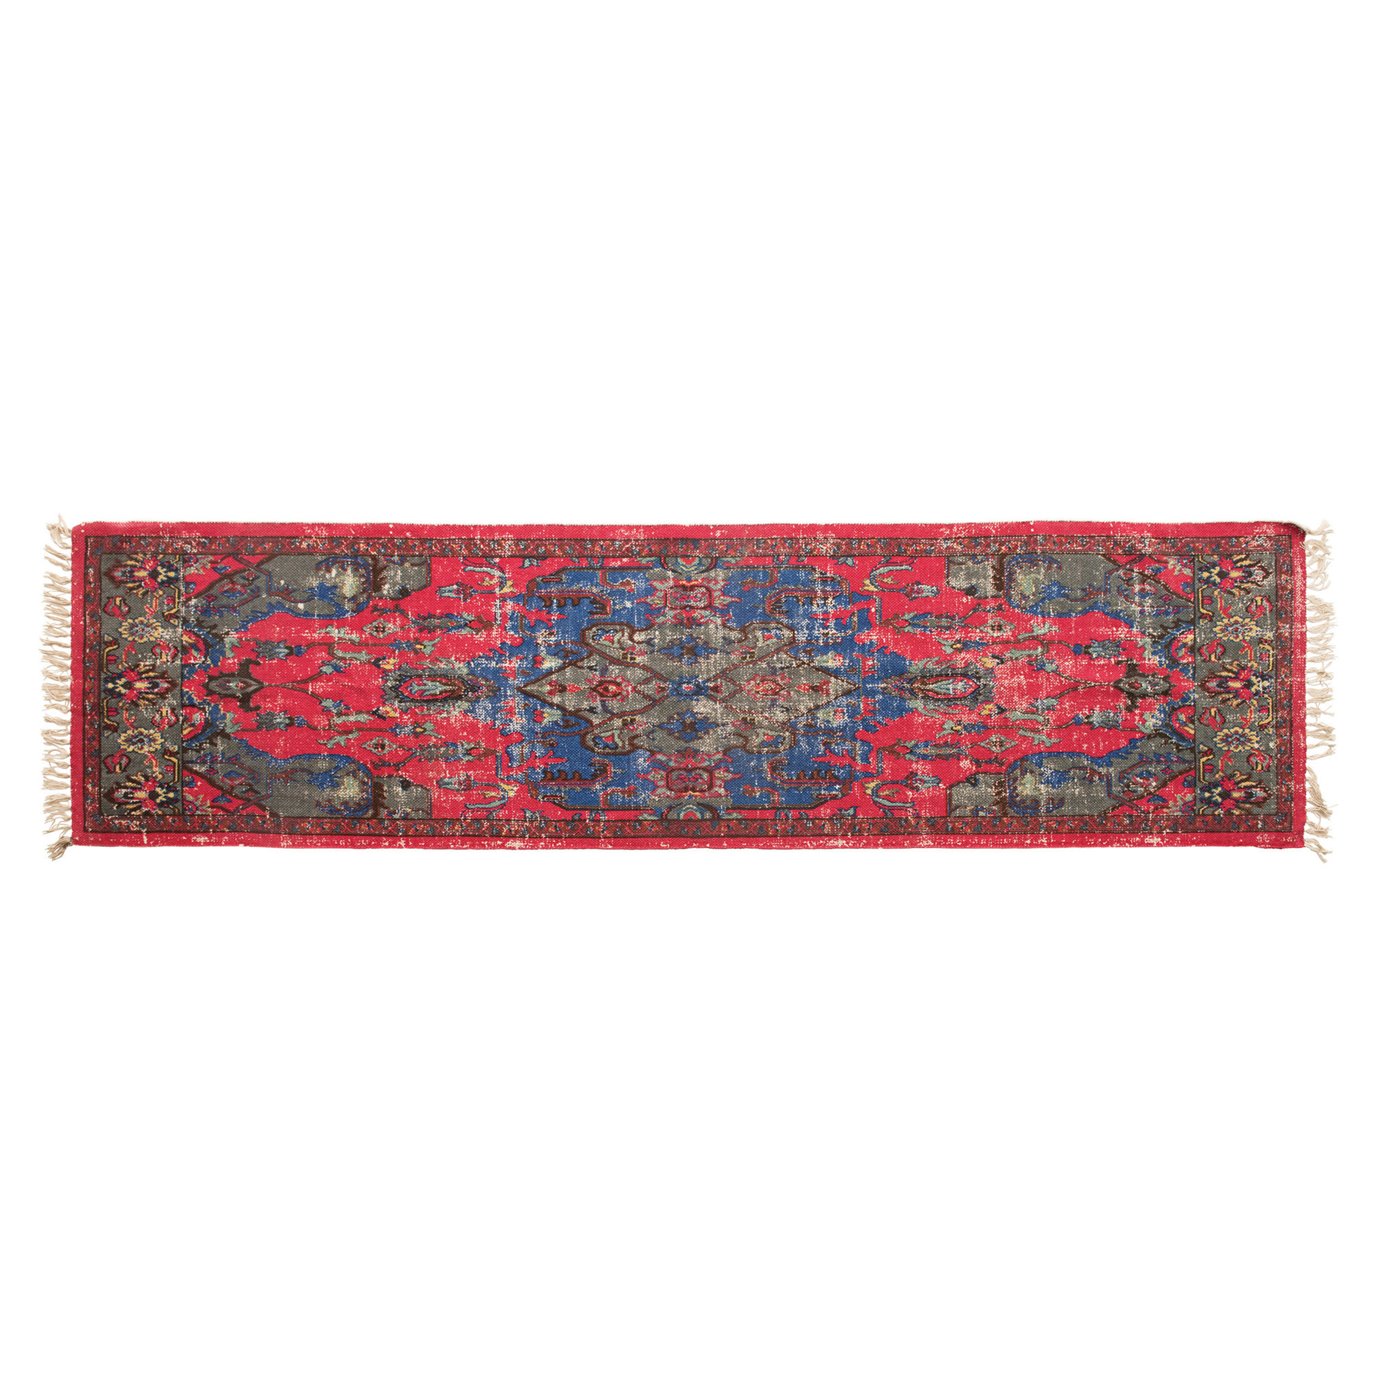 Woven Cotton Distressed Print Floor Runner, Multi Color